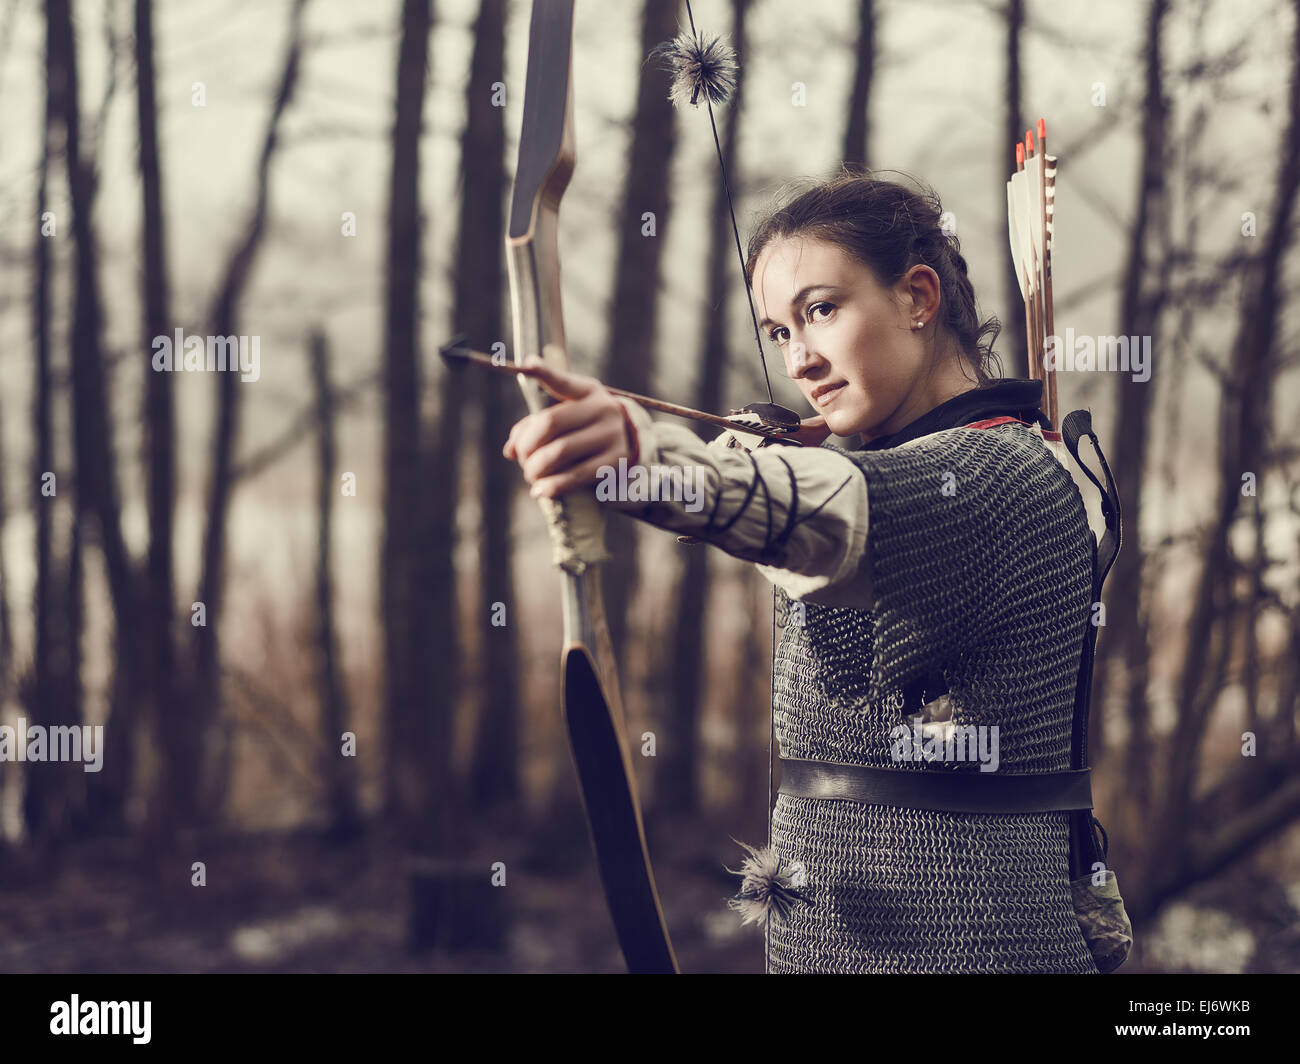 Medieval archer woman, she wearing a chainmail and use a bow and arrow, gloomy forest, cross-processed image. Stock Photo